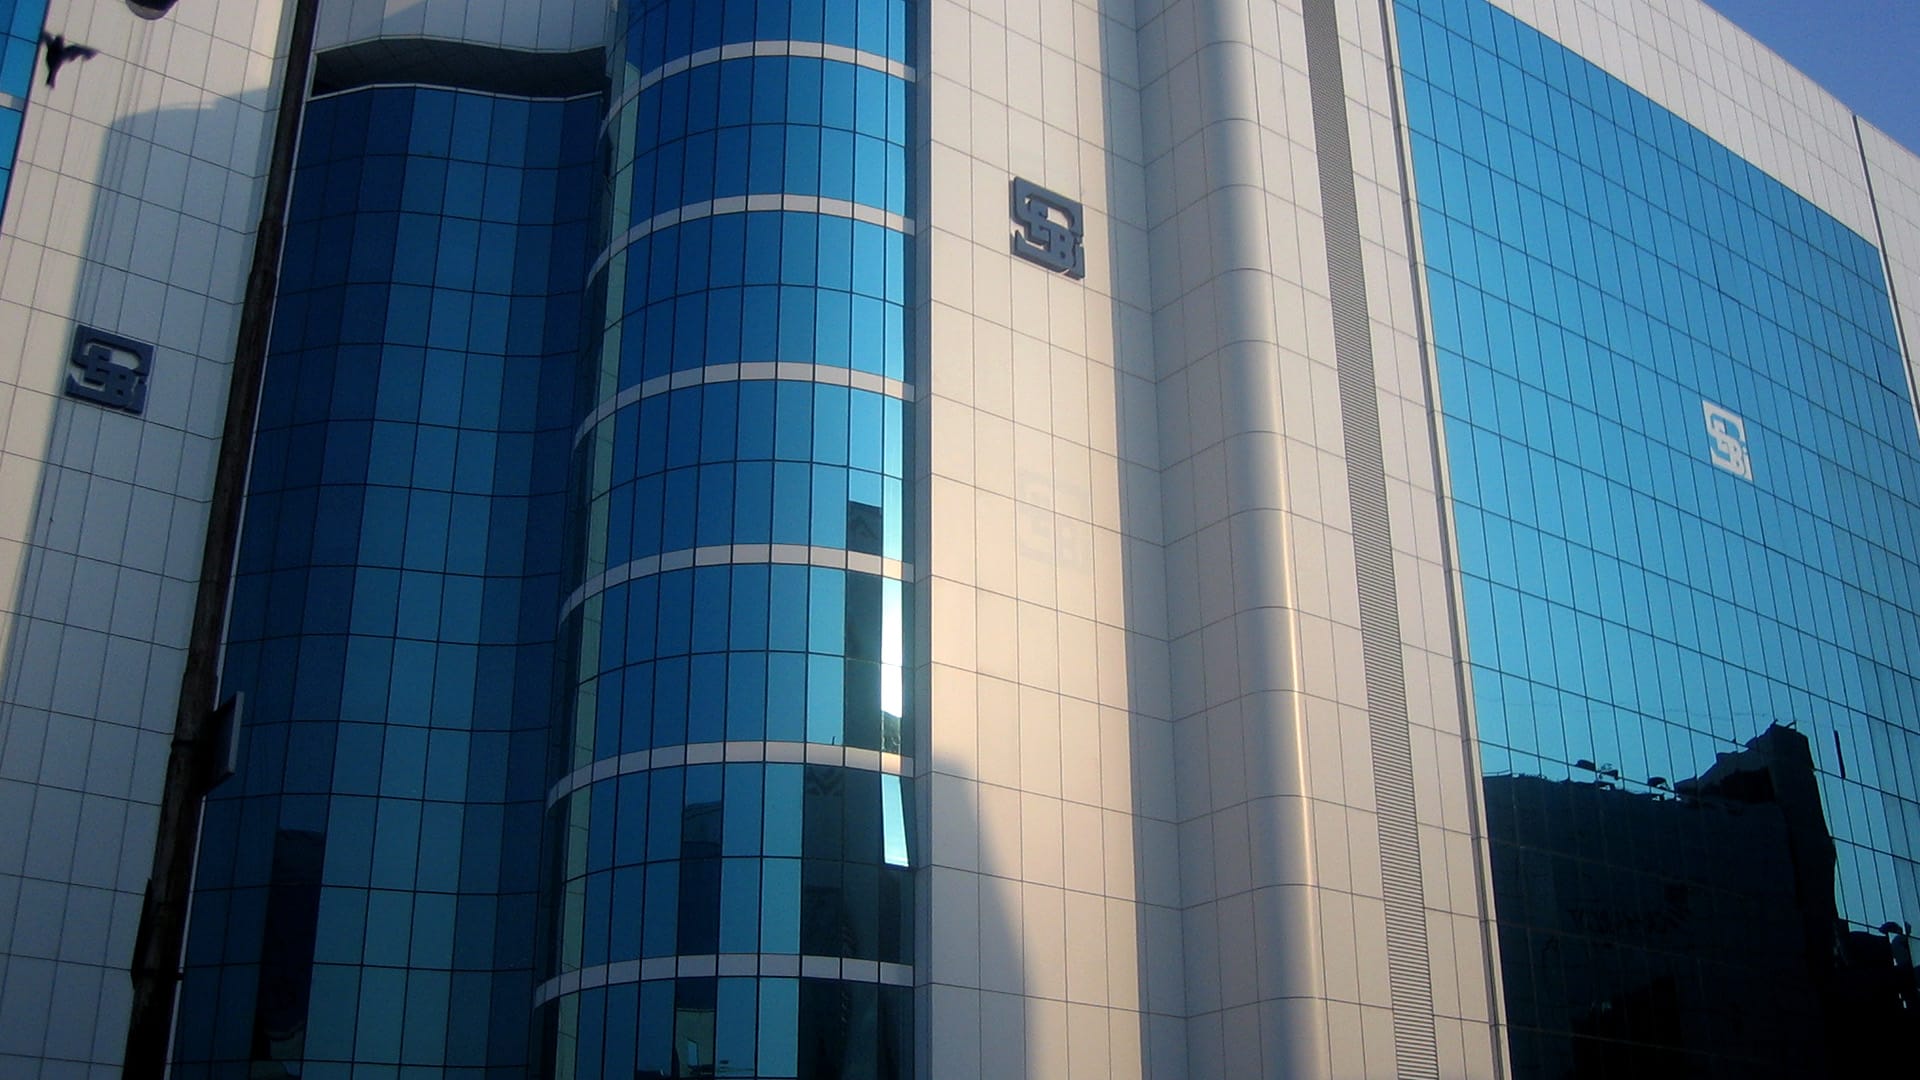 Sebi extends deadline to submit public comment on proposed framework to regulate ESG rating providers